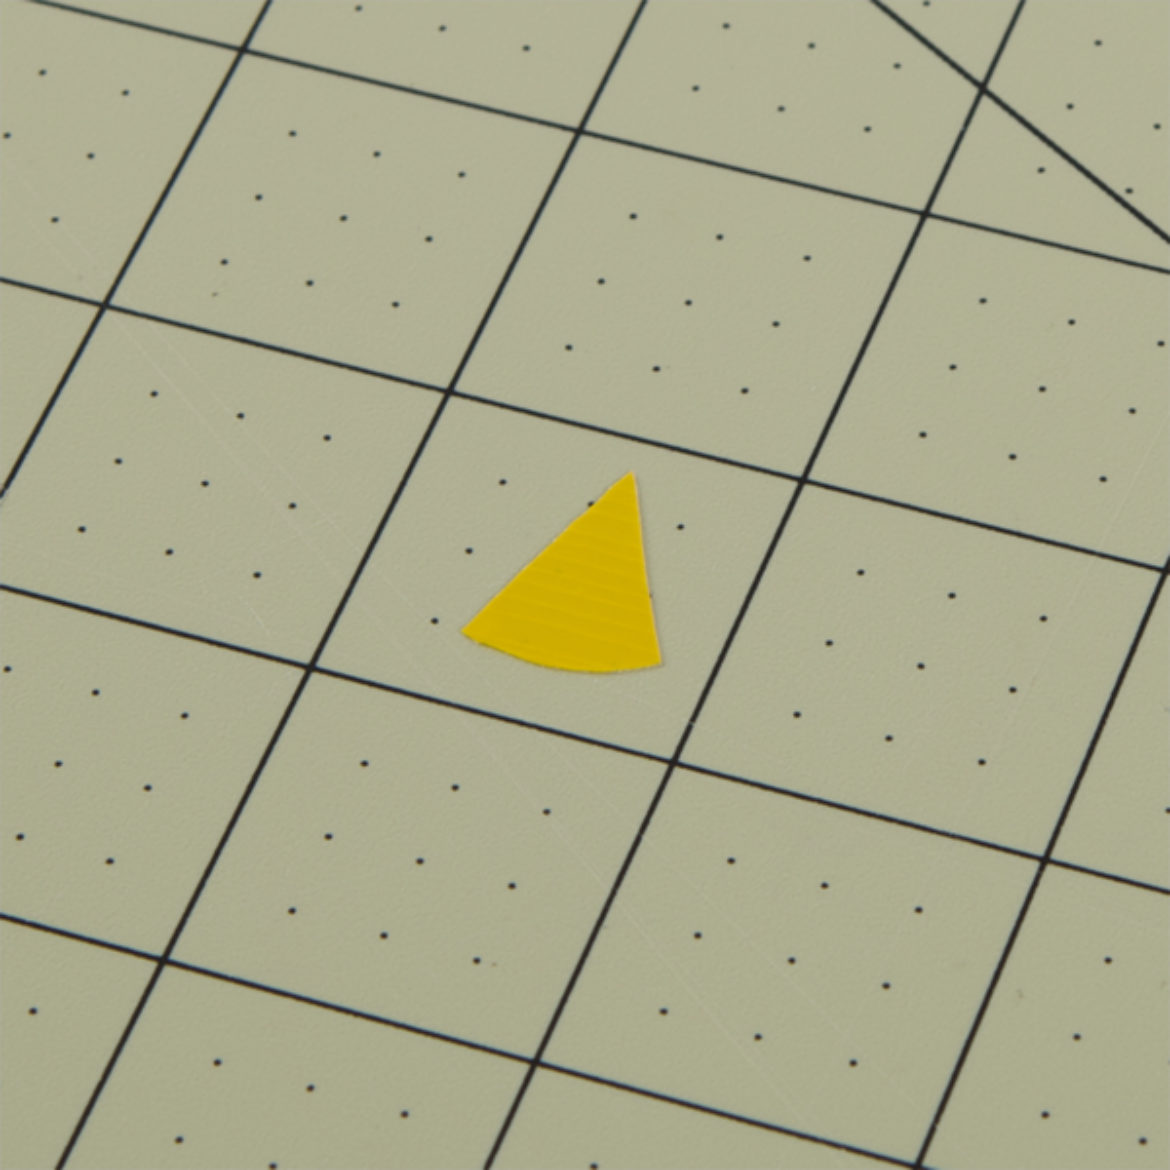 Small triangular wedges that resemble the segments of a lemon